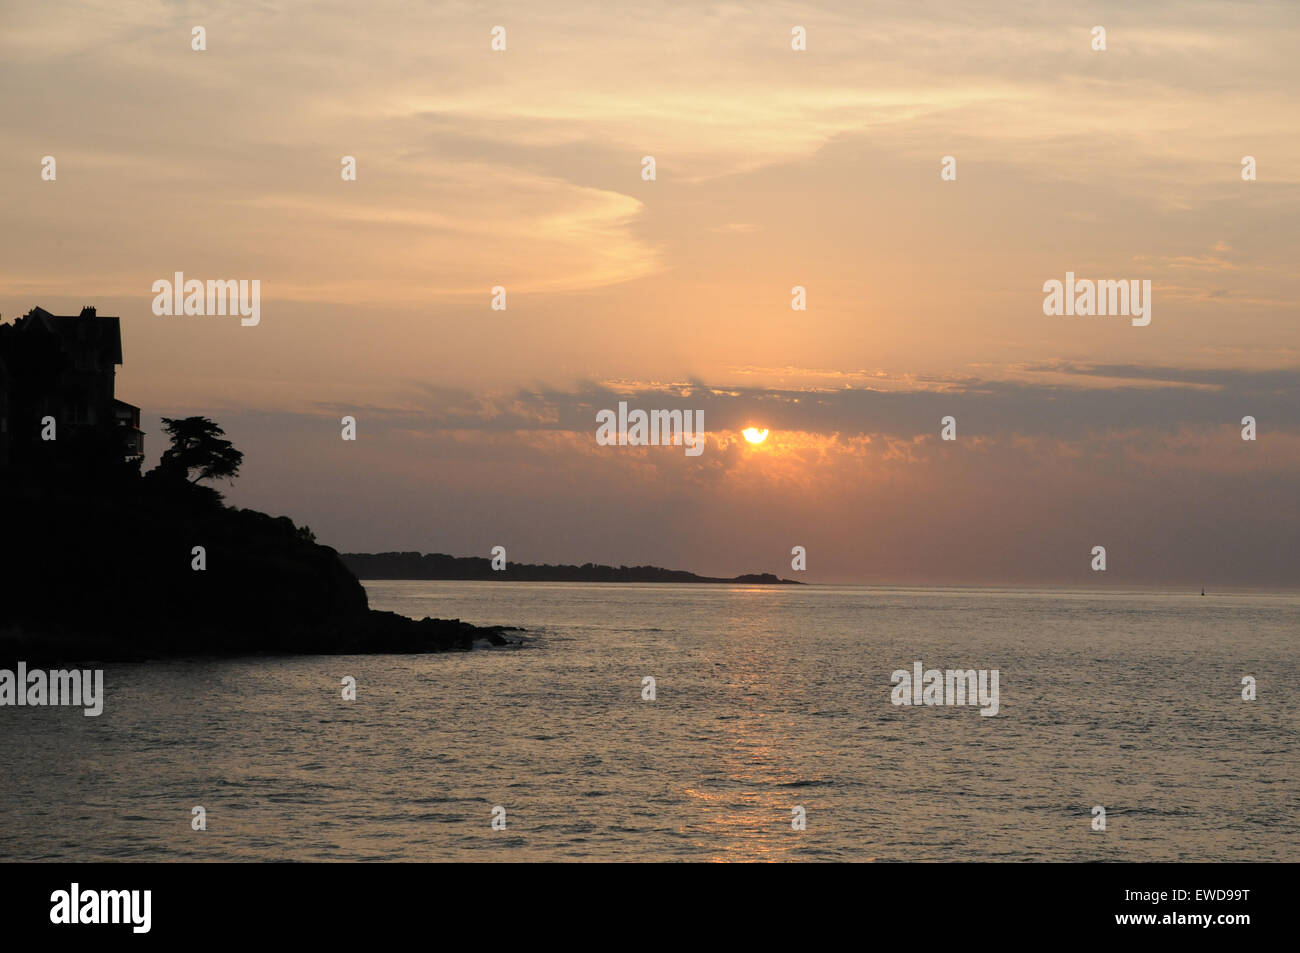 The setting sun over the Granit Rose (pink granite) coast of Brittany as seen from the beach at Trestrignel near Perros Guirec. Stock Photo